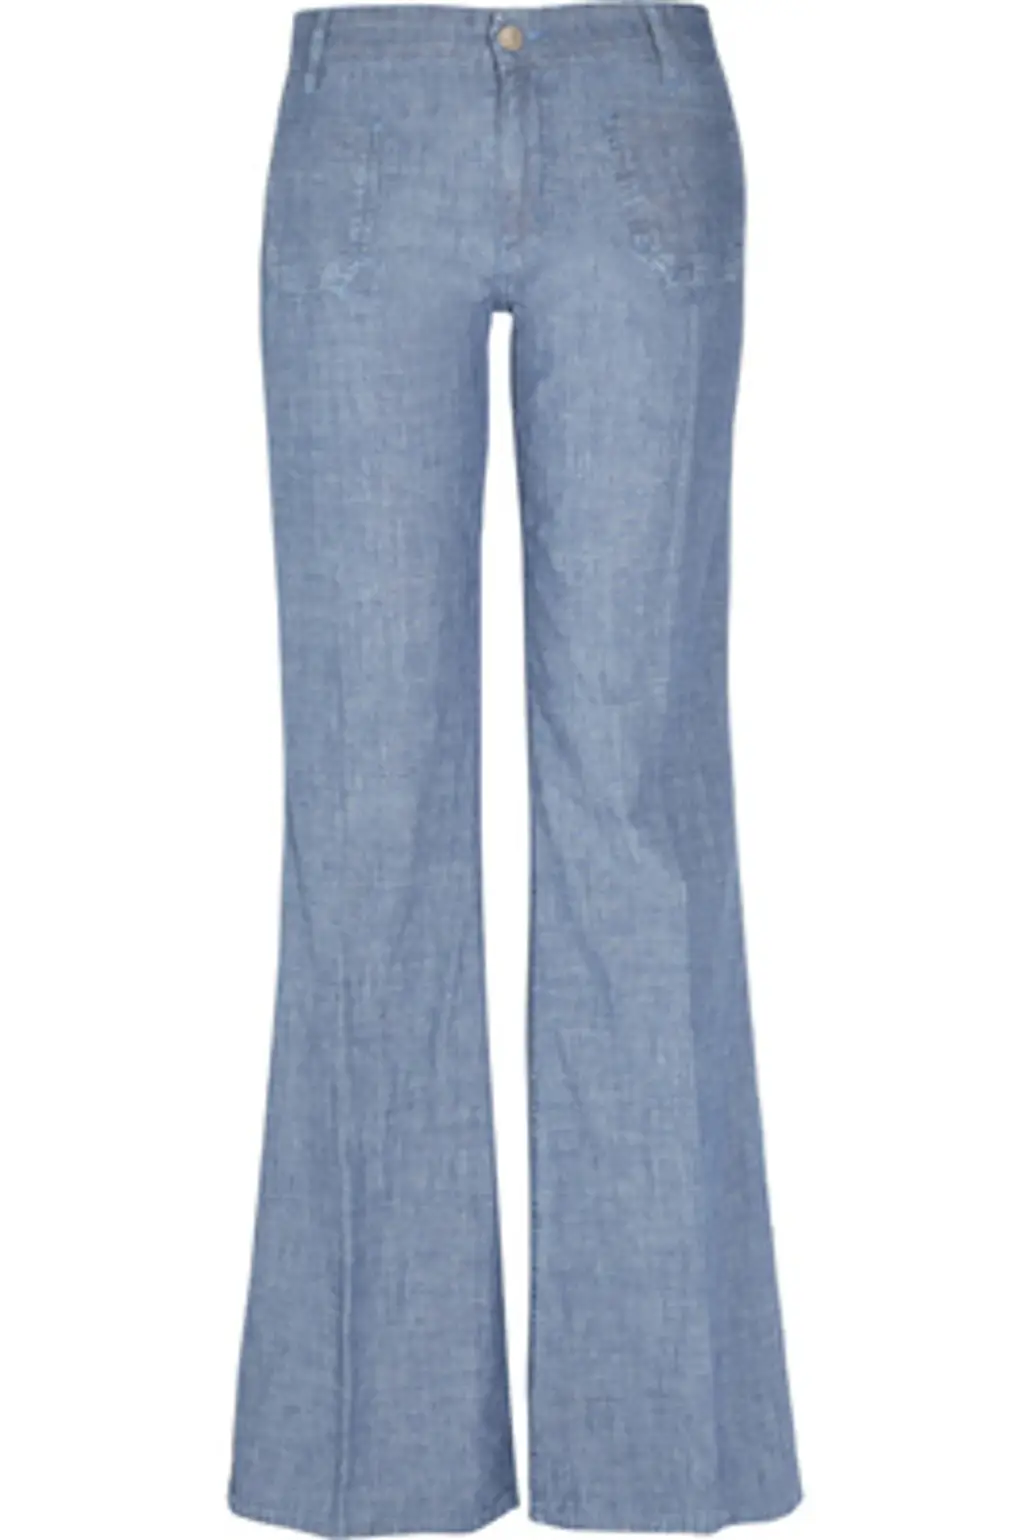 MIH Jeans Chambray Jeans